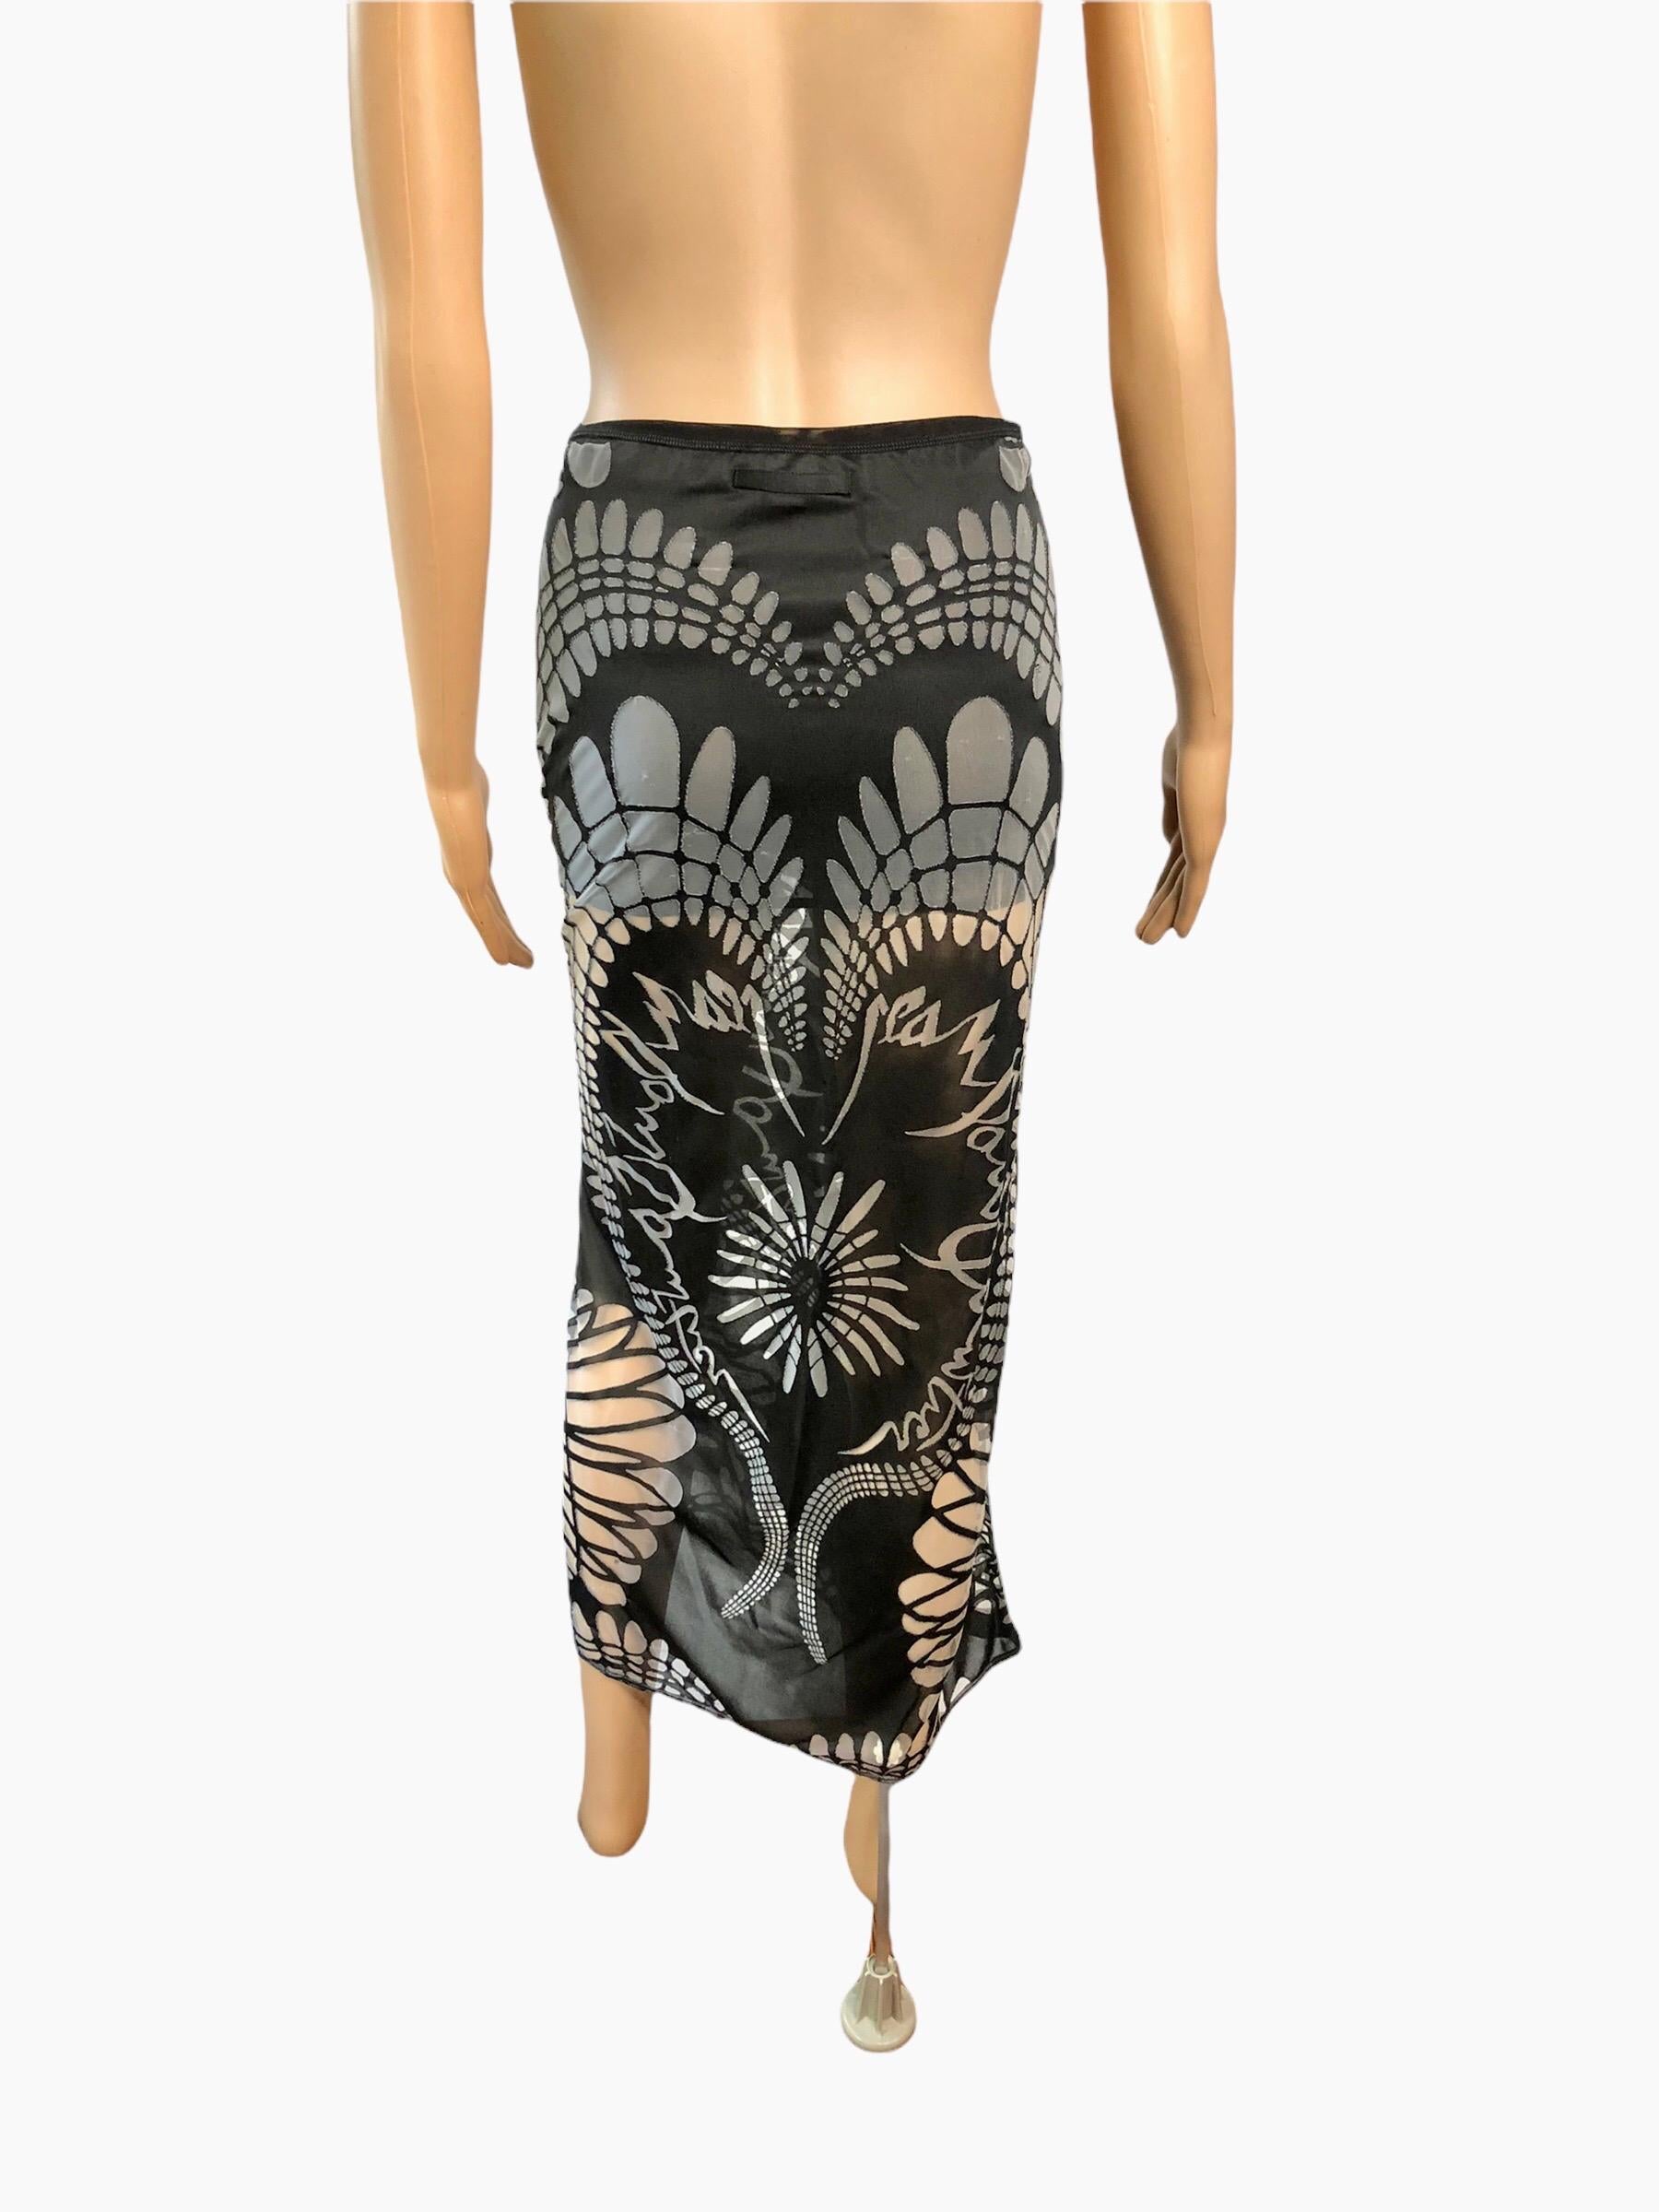 Jean Paul Gaultier Soleil S/S 2001 Logo Semi-Sheer Bodycon Mesh Maxi Dress In Good Condition For Sale In Naples, FL